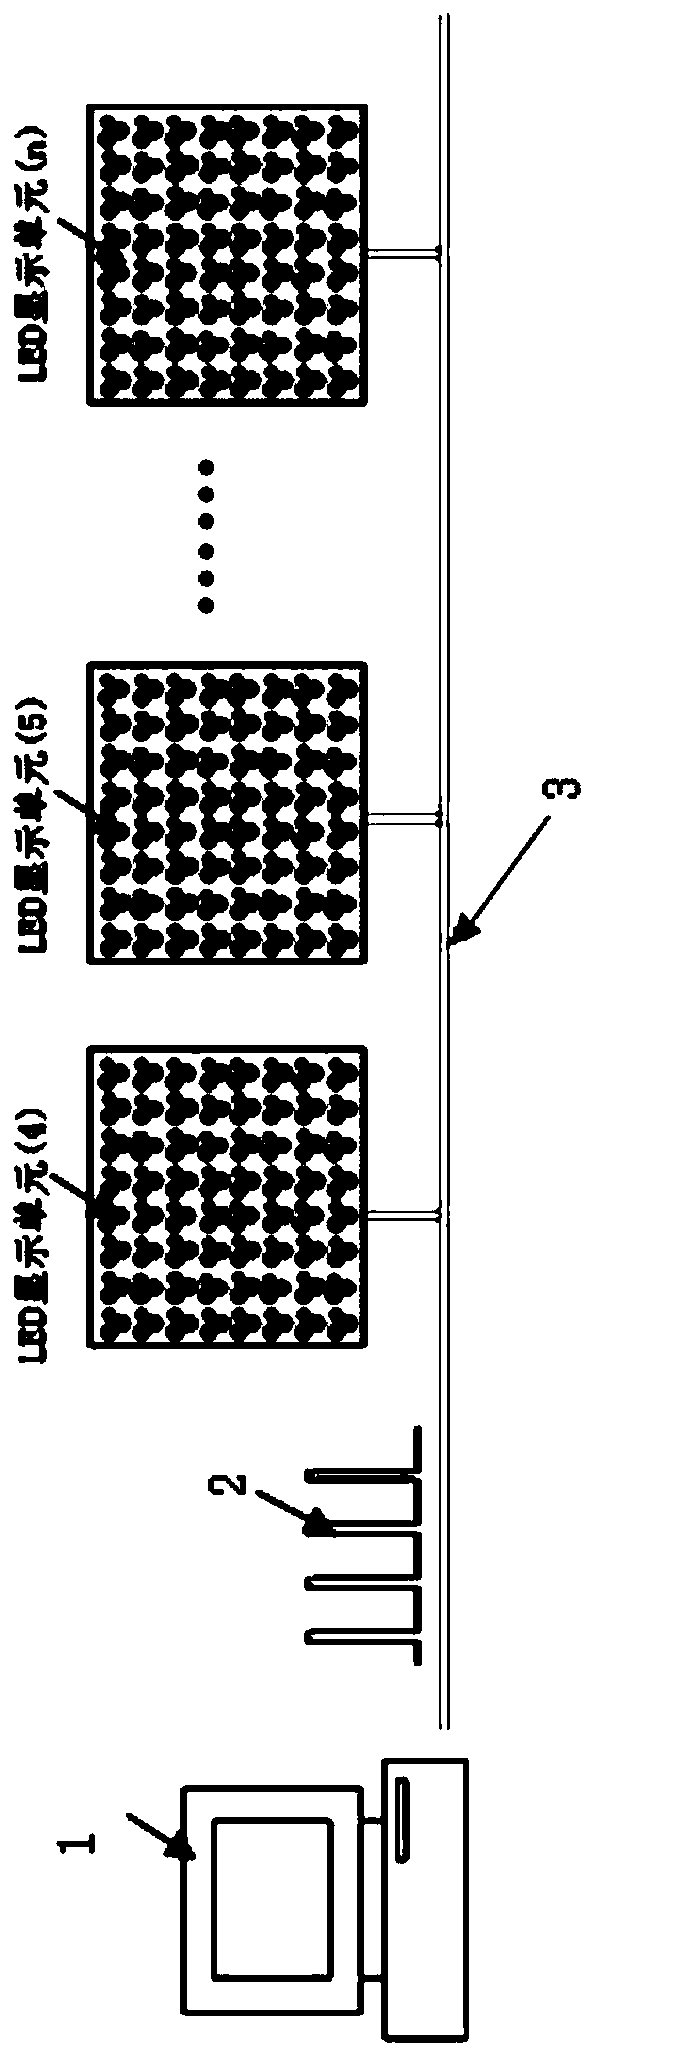 Integrated system and method for automatically regulating luminance after LED display screen gets out of control